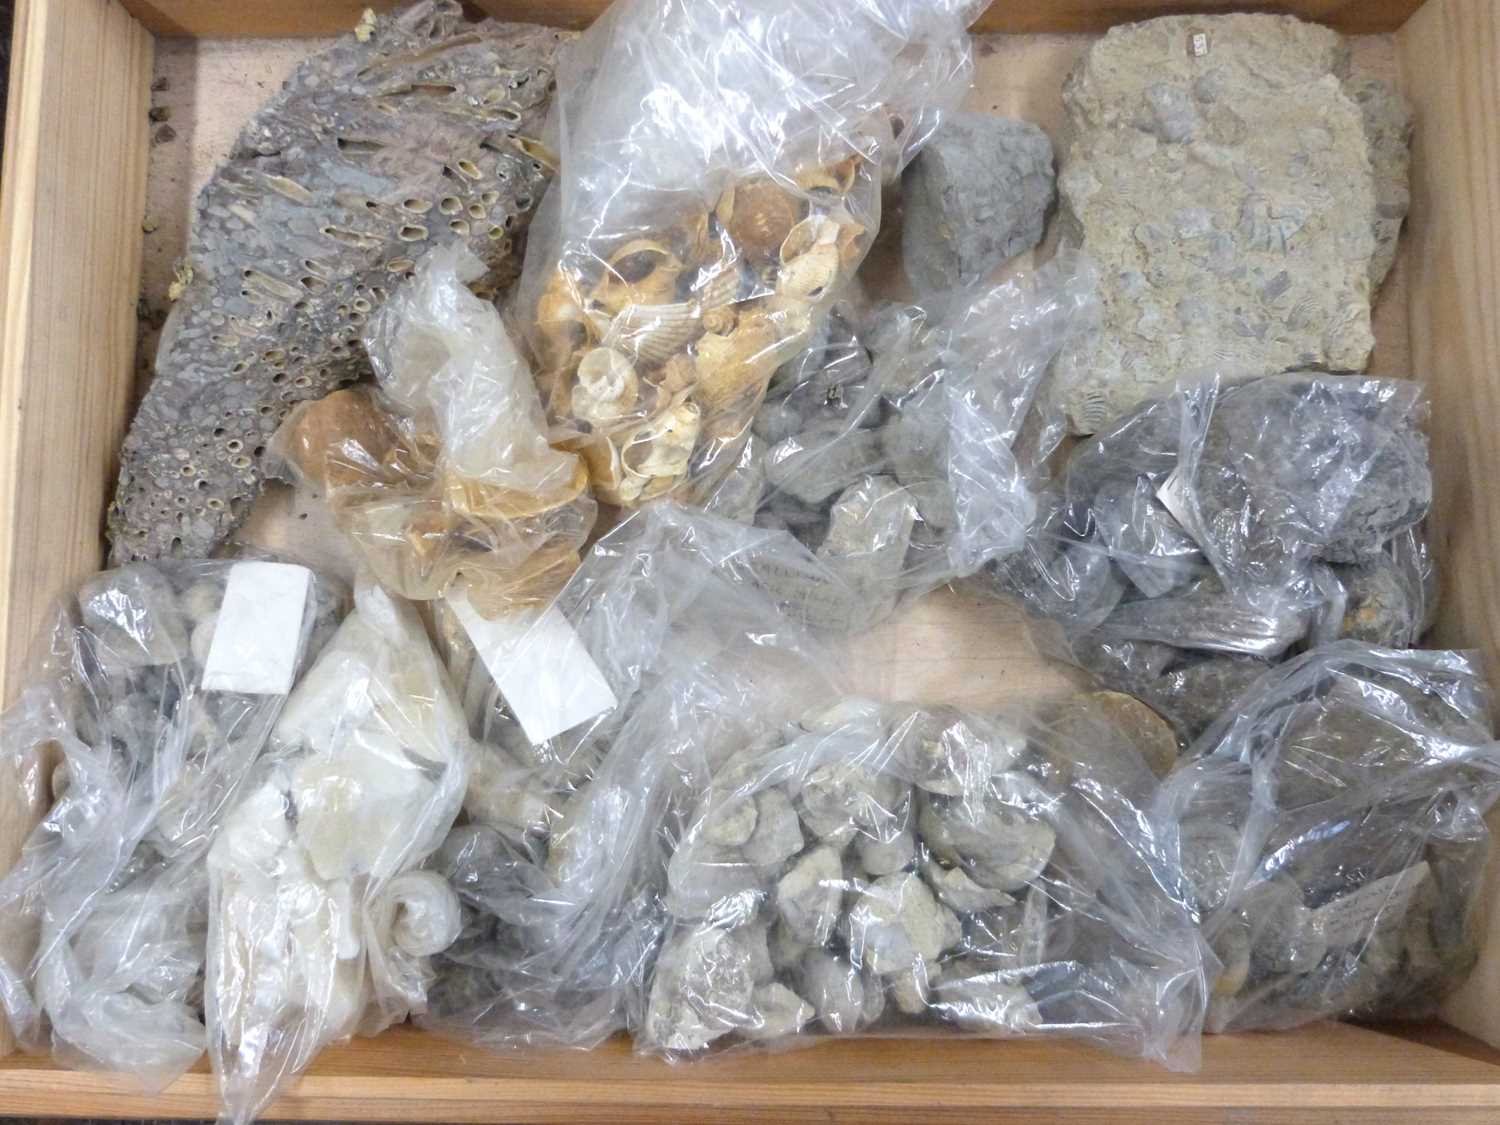 Collection of mineralogical and soil samples housed in wooden storage boxes - Image 6 of 12